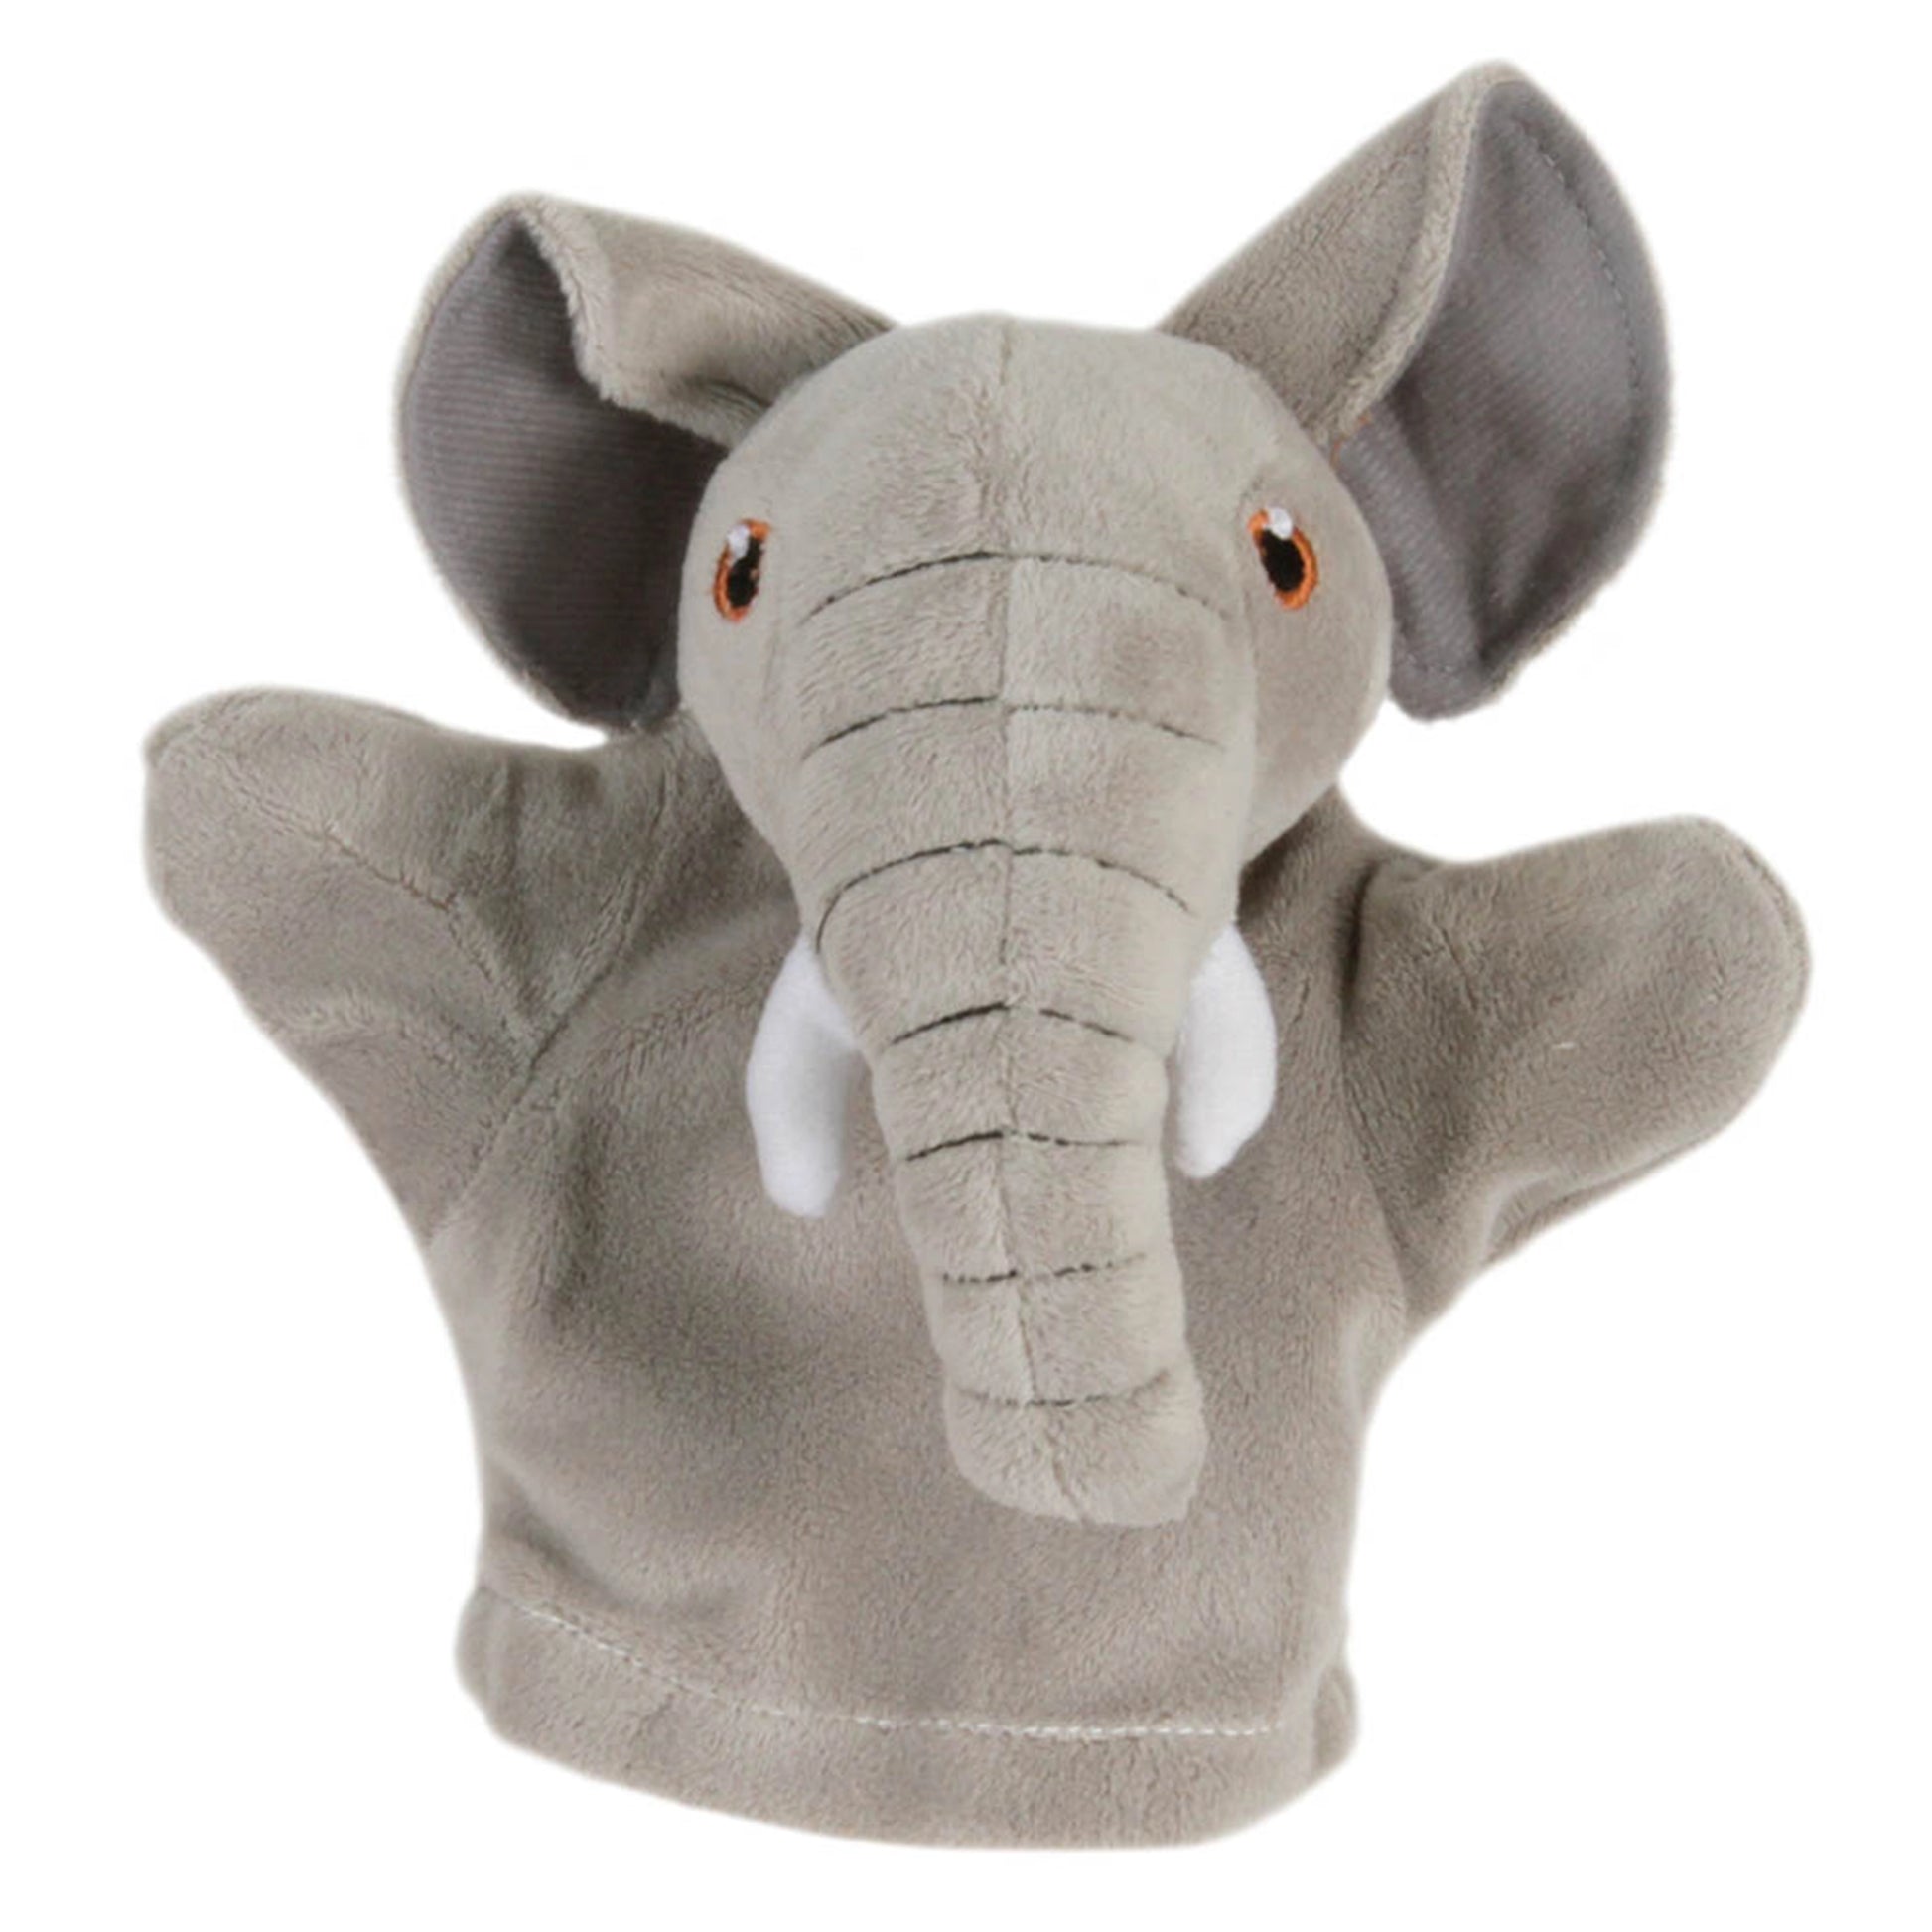 My First Puppet - Elephant - The Puppet Company - The Forgotten Toy Shop